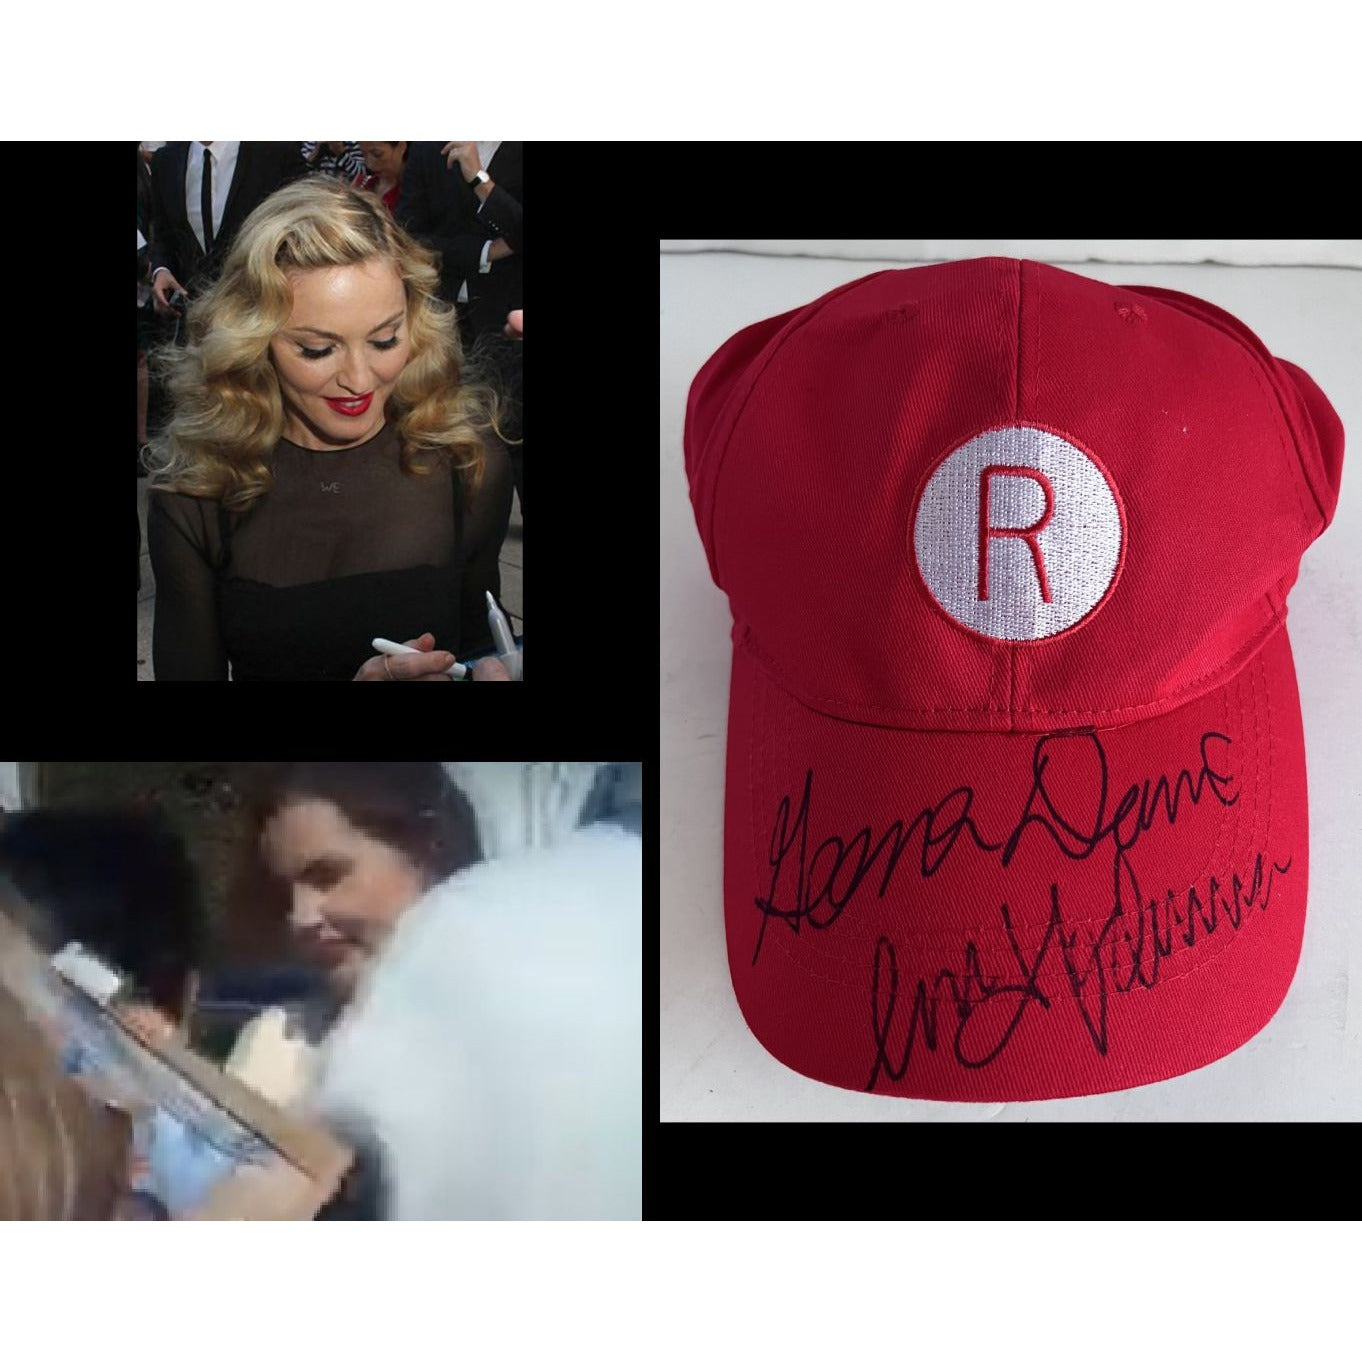 "A League of Their Own "  Rockford Peaches, authentic baseball cap signed with proof Gena Davis and Madonna Ciccone